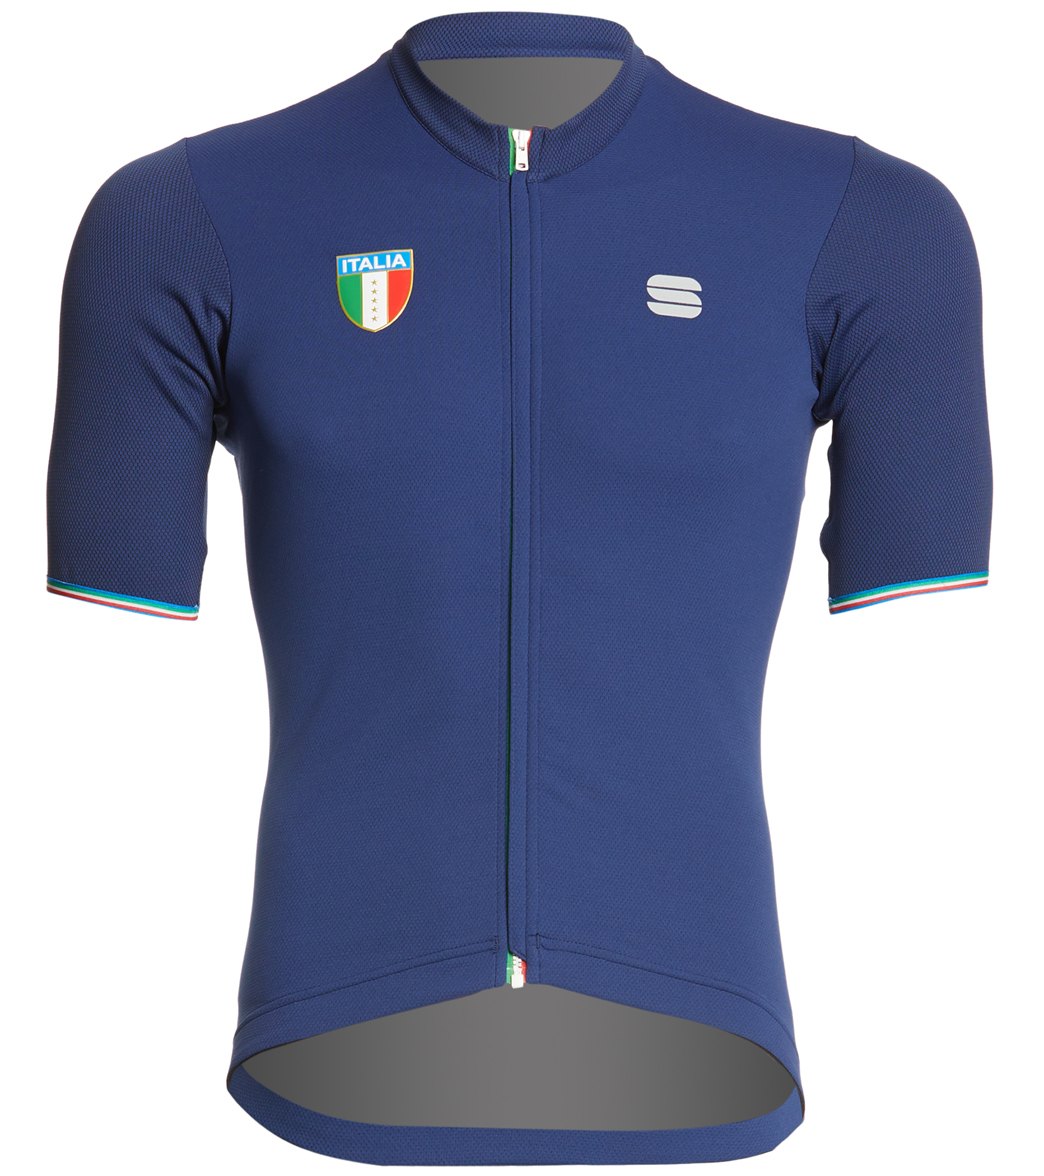 Sportful Men's Italia CL Jersey at SwimOutlet.com - Free Shipping